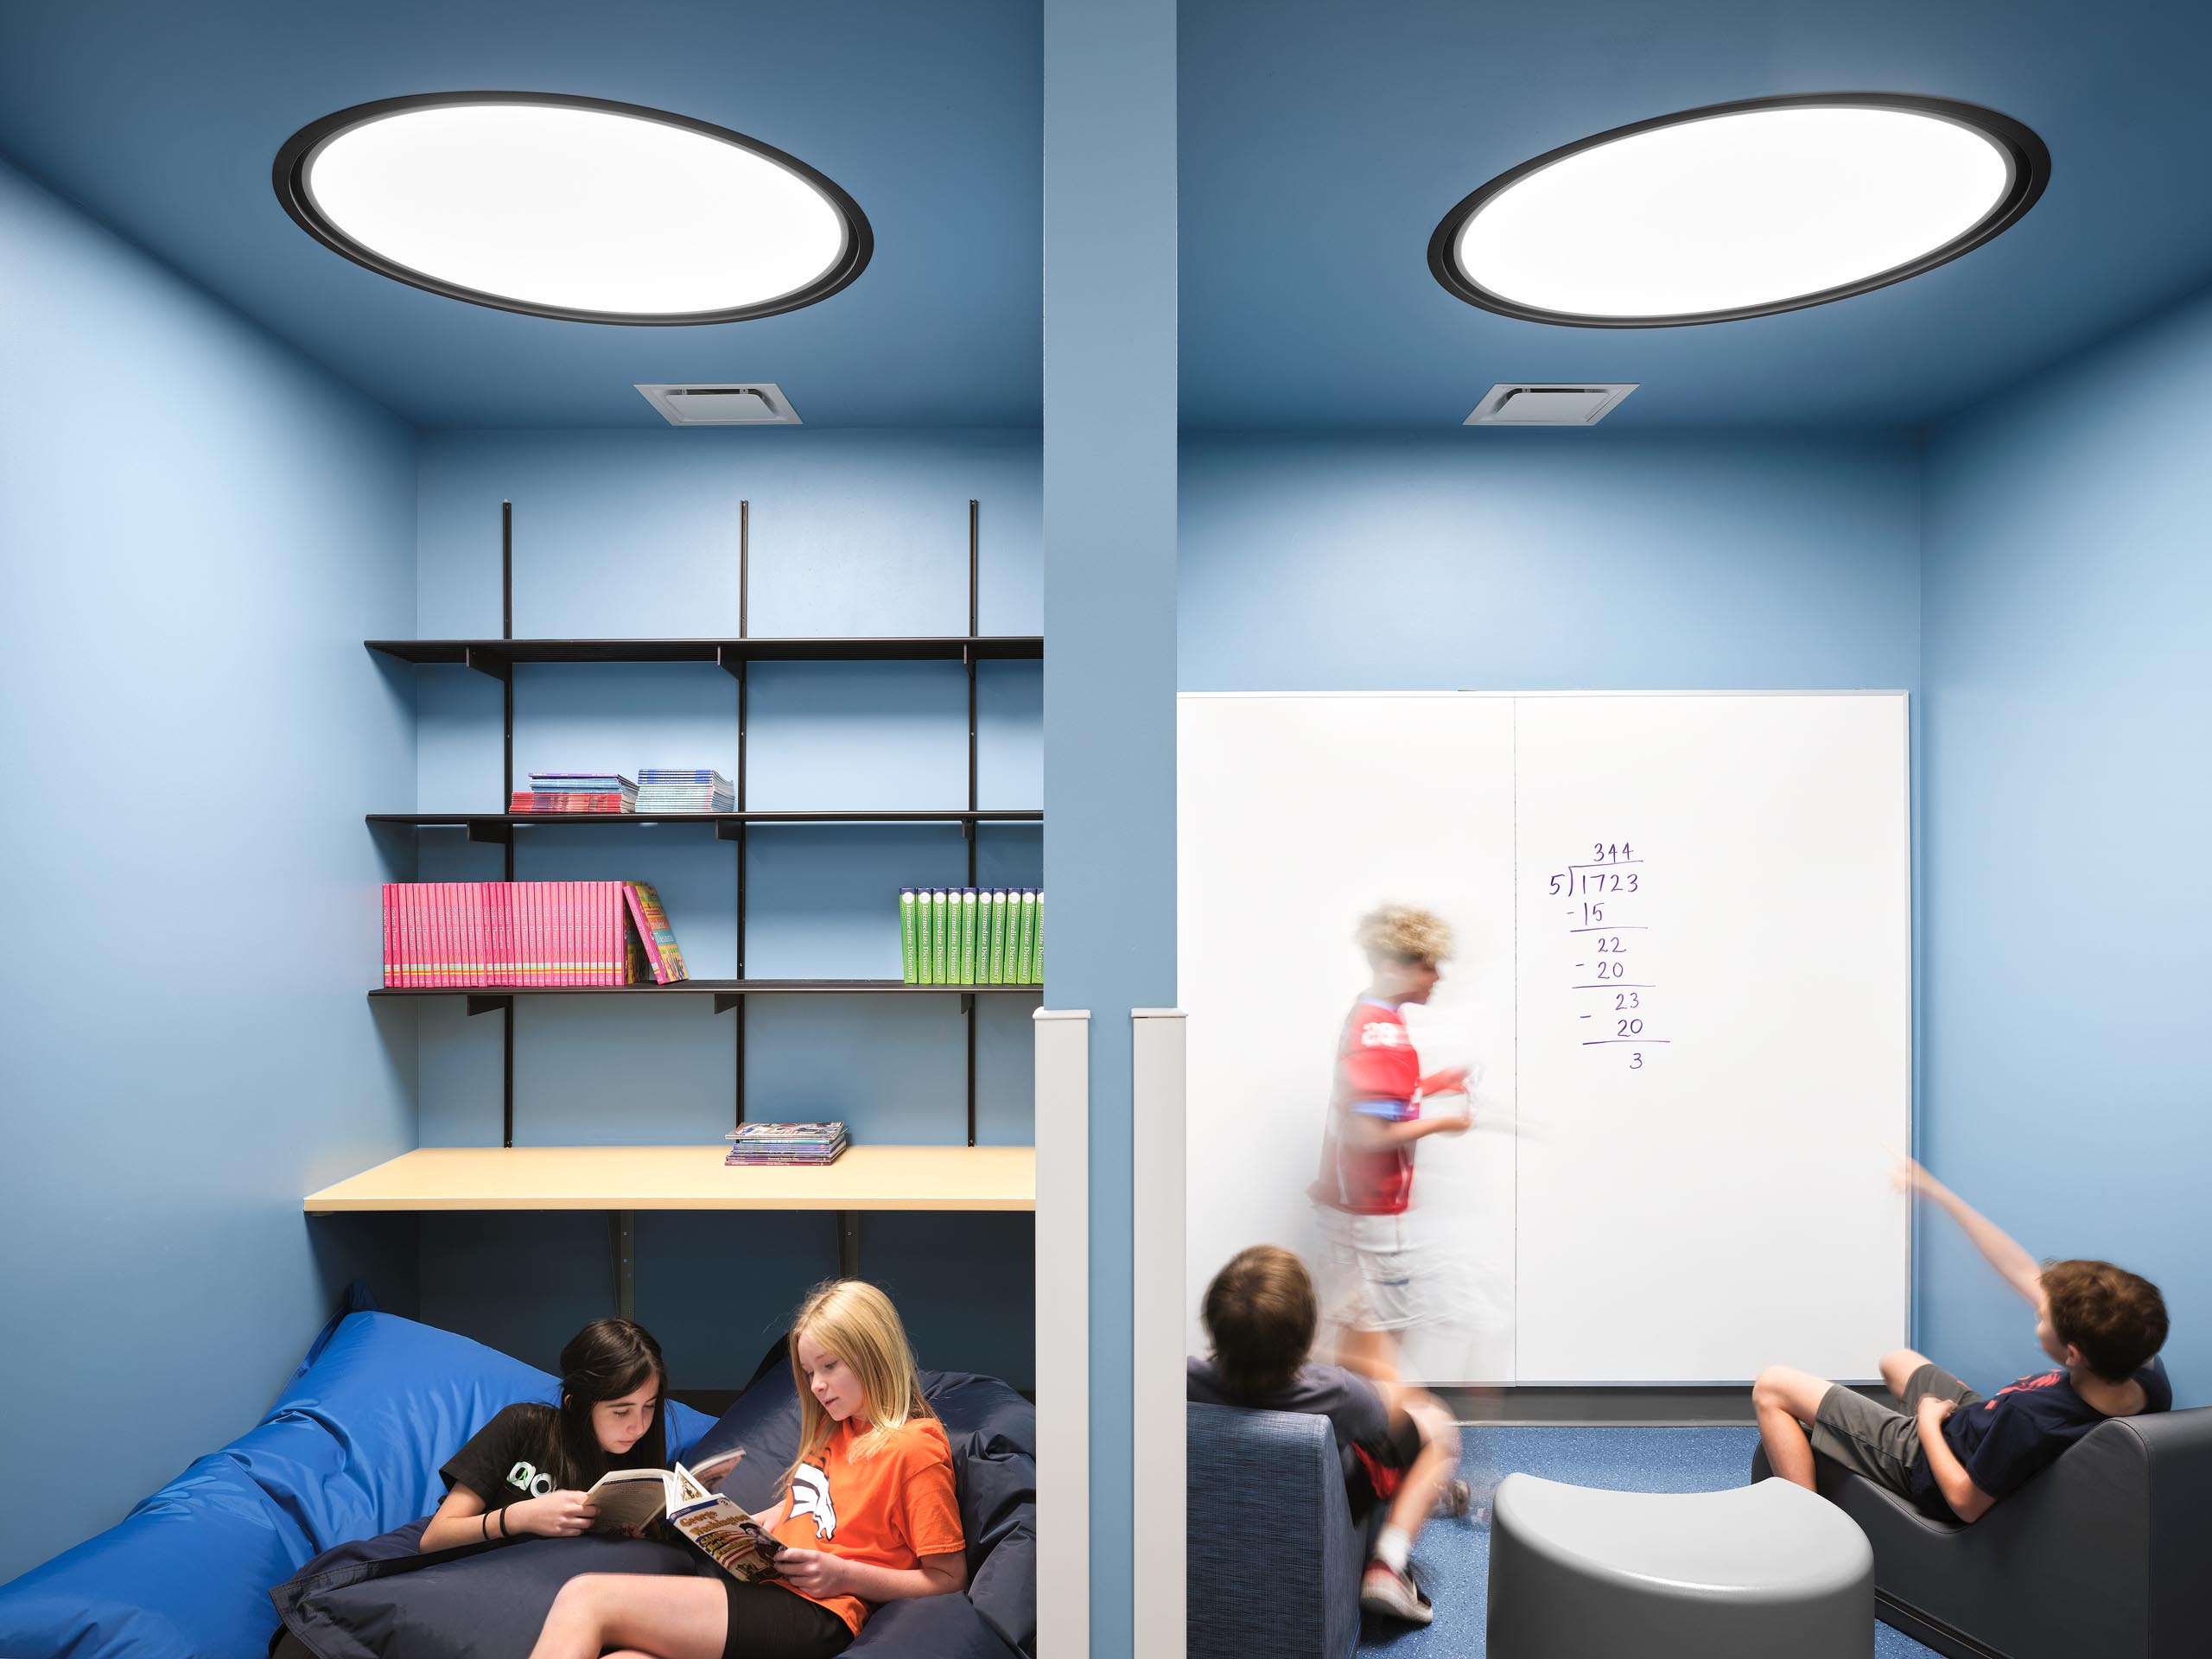 Architectural photography by Warren Diggles. Eaton Elementary students hanging out in built-in nooks. K-12 remodel project by RB+B Architects and FCI Constructors.